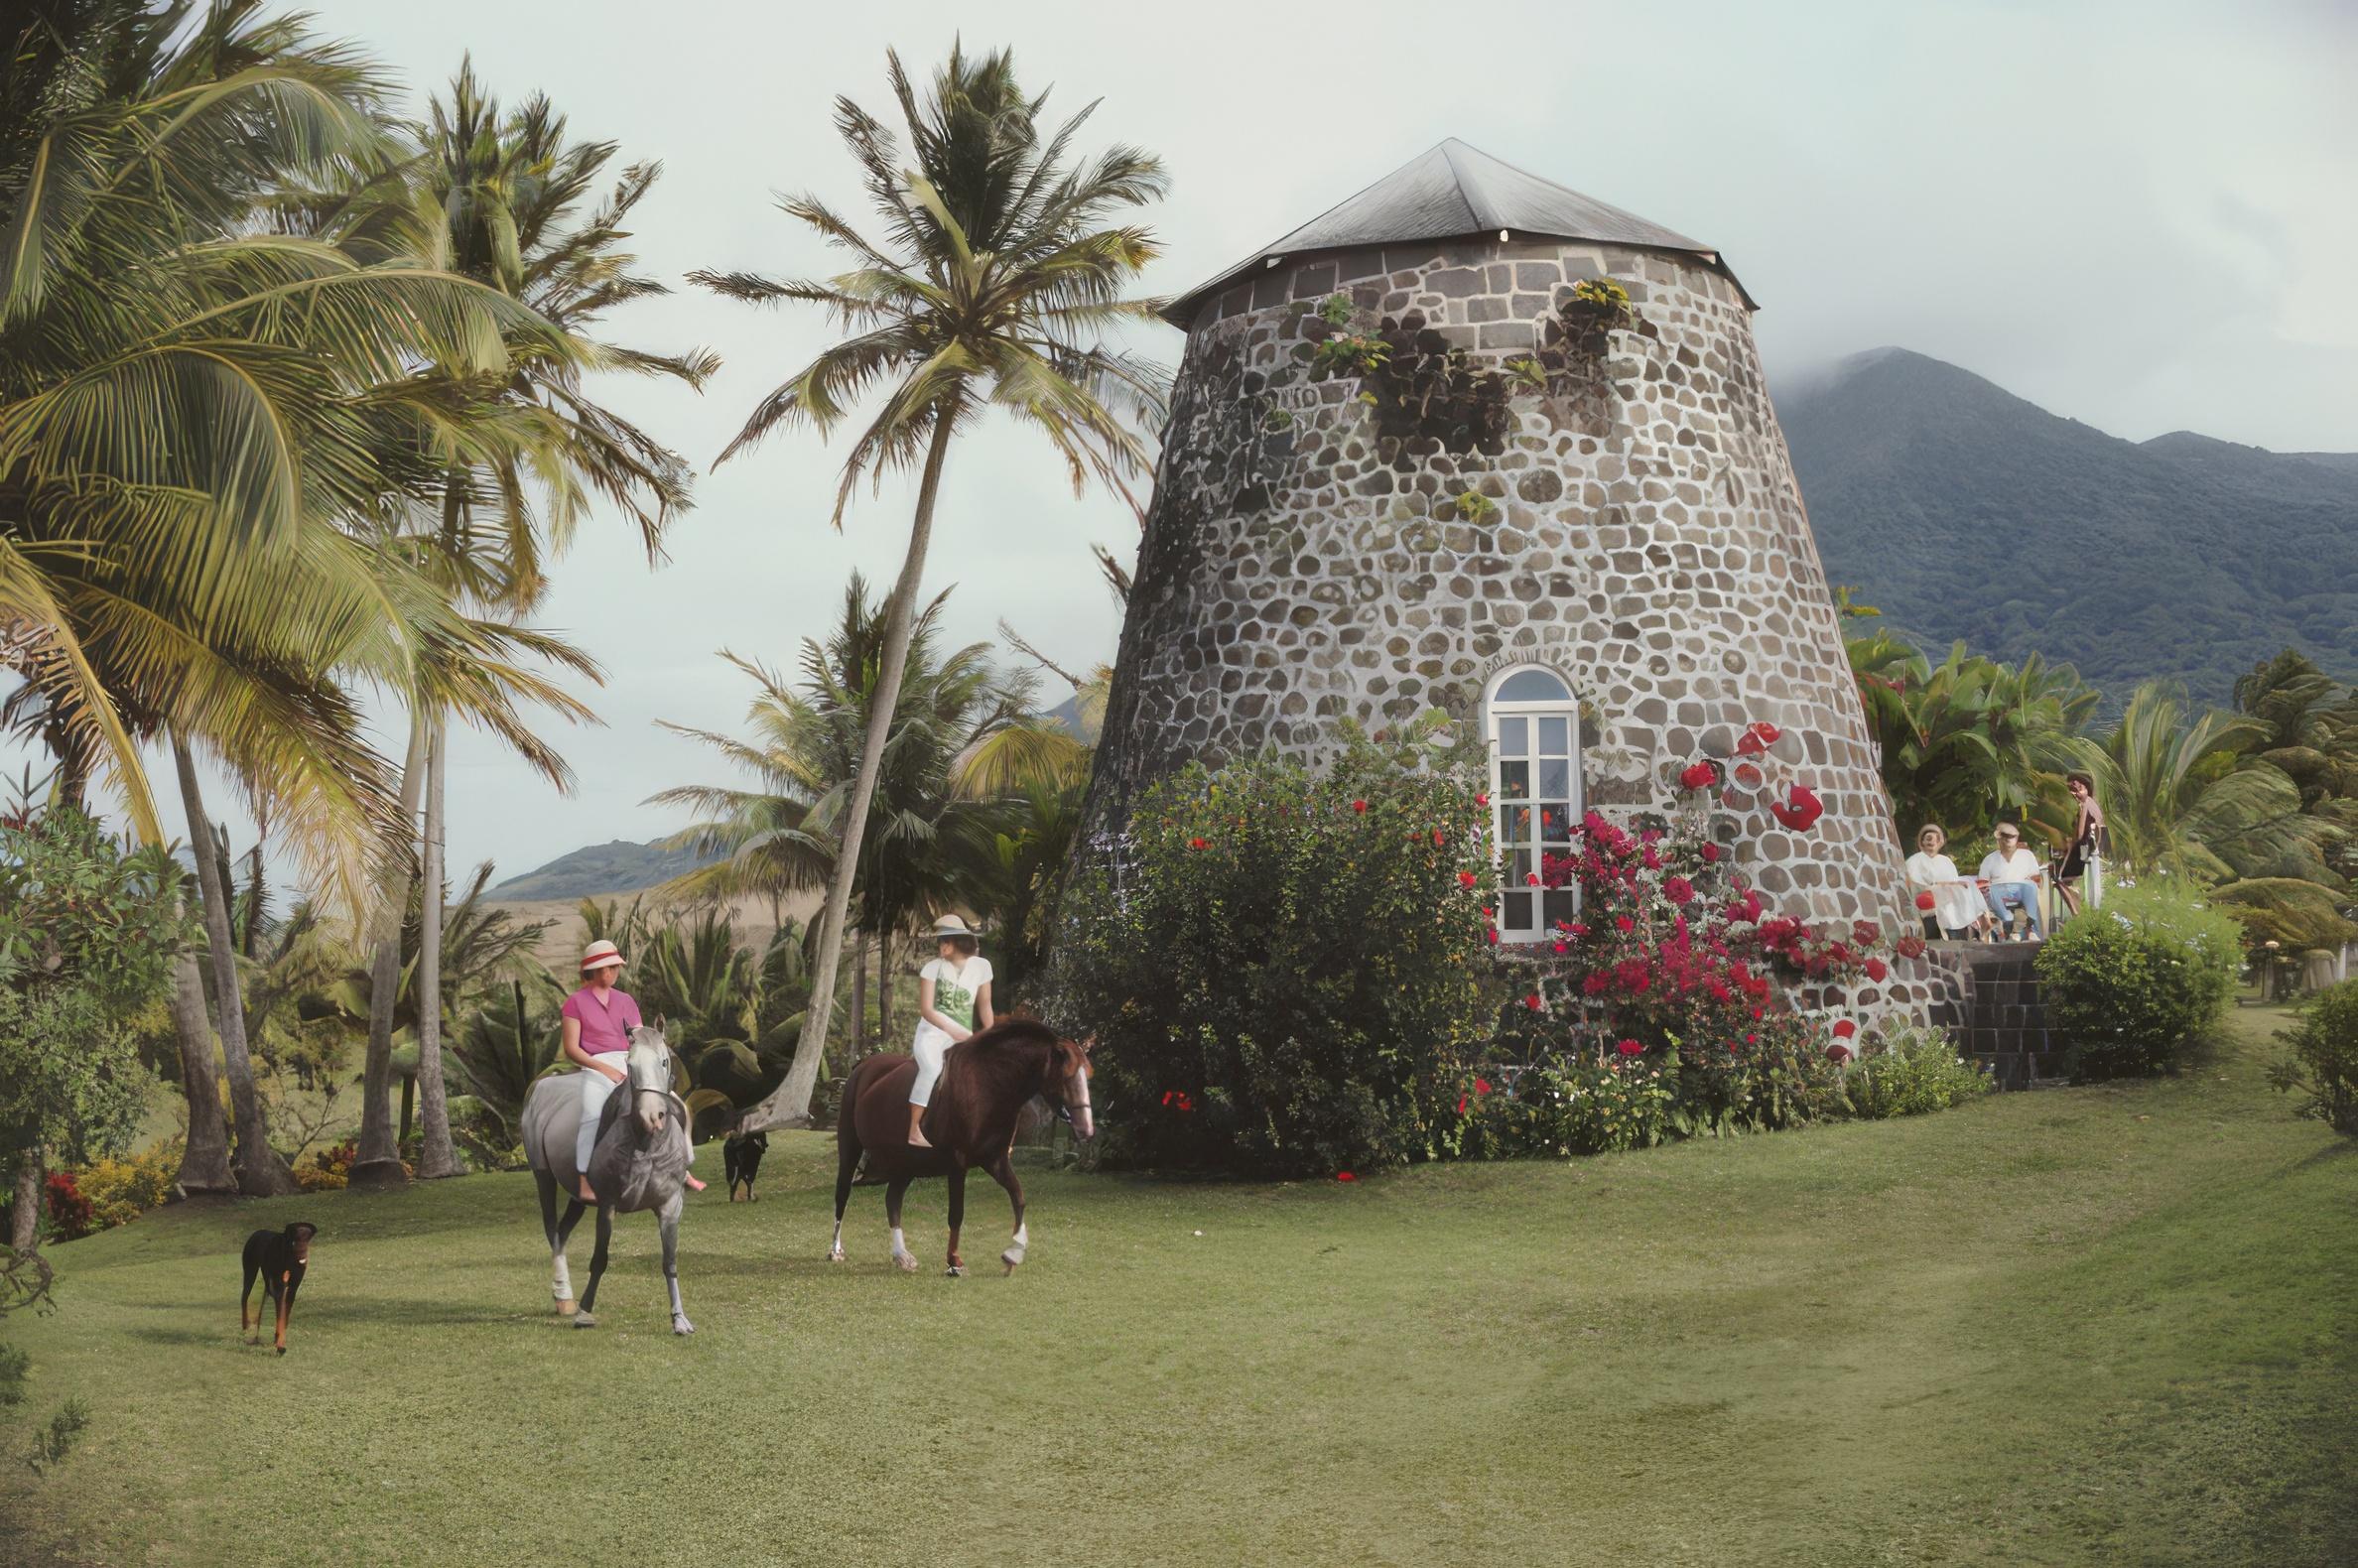 Slim Aarons
Saint Kitts and Nevis
1984 (printed later)
C print
Estate stamped and hand numbered edition of 150 with certificate of authenticity from the estate.   

Horseback riding at the Rawlins Plantation inn, Saint Kitts and Nevis, March 1984.